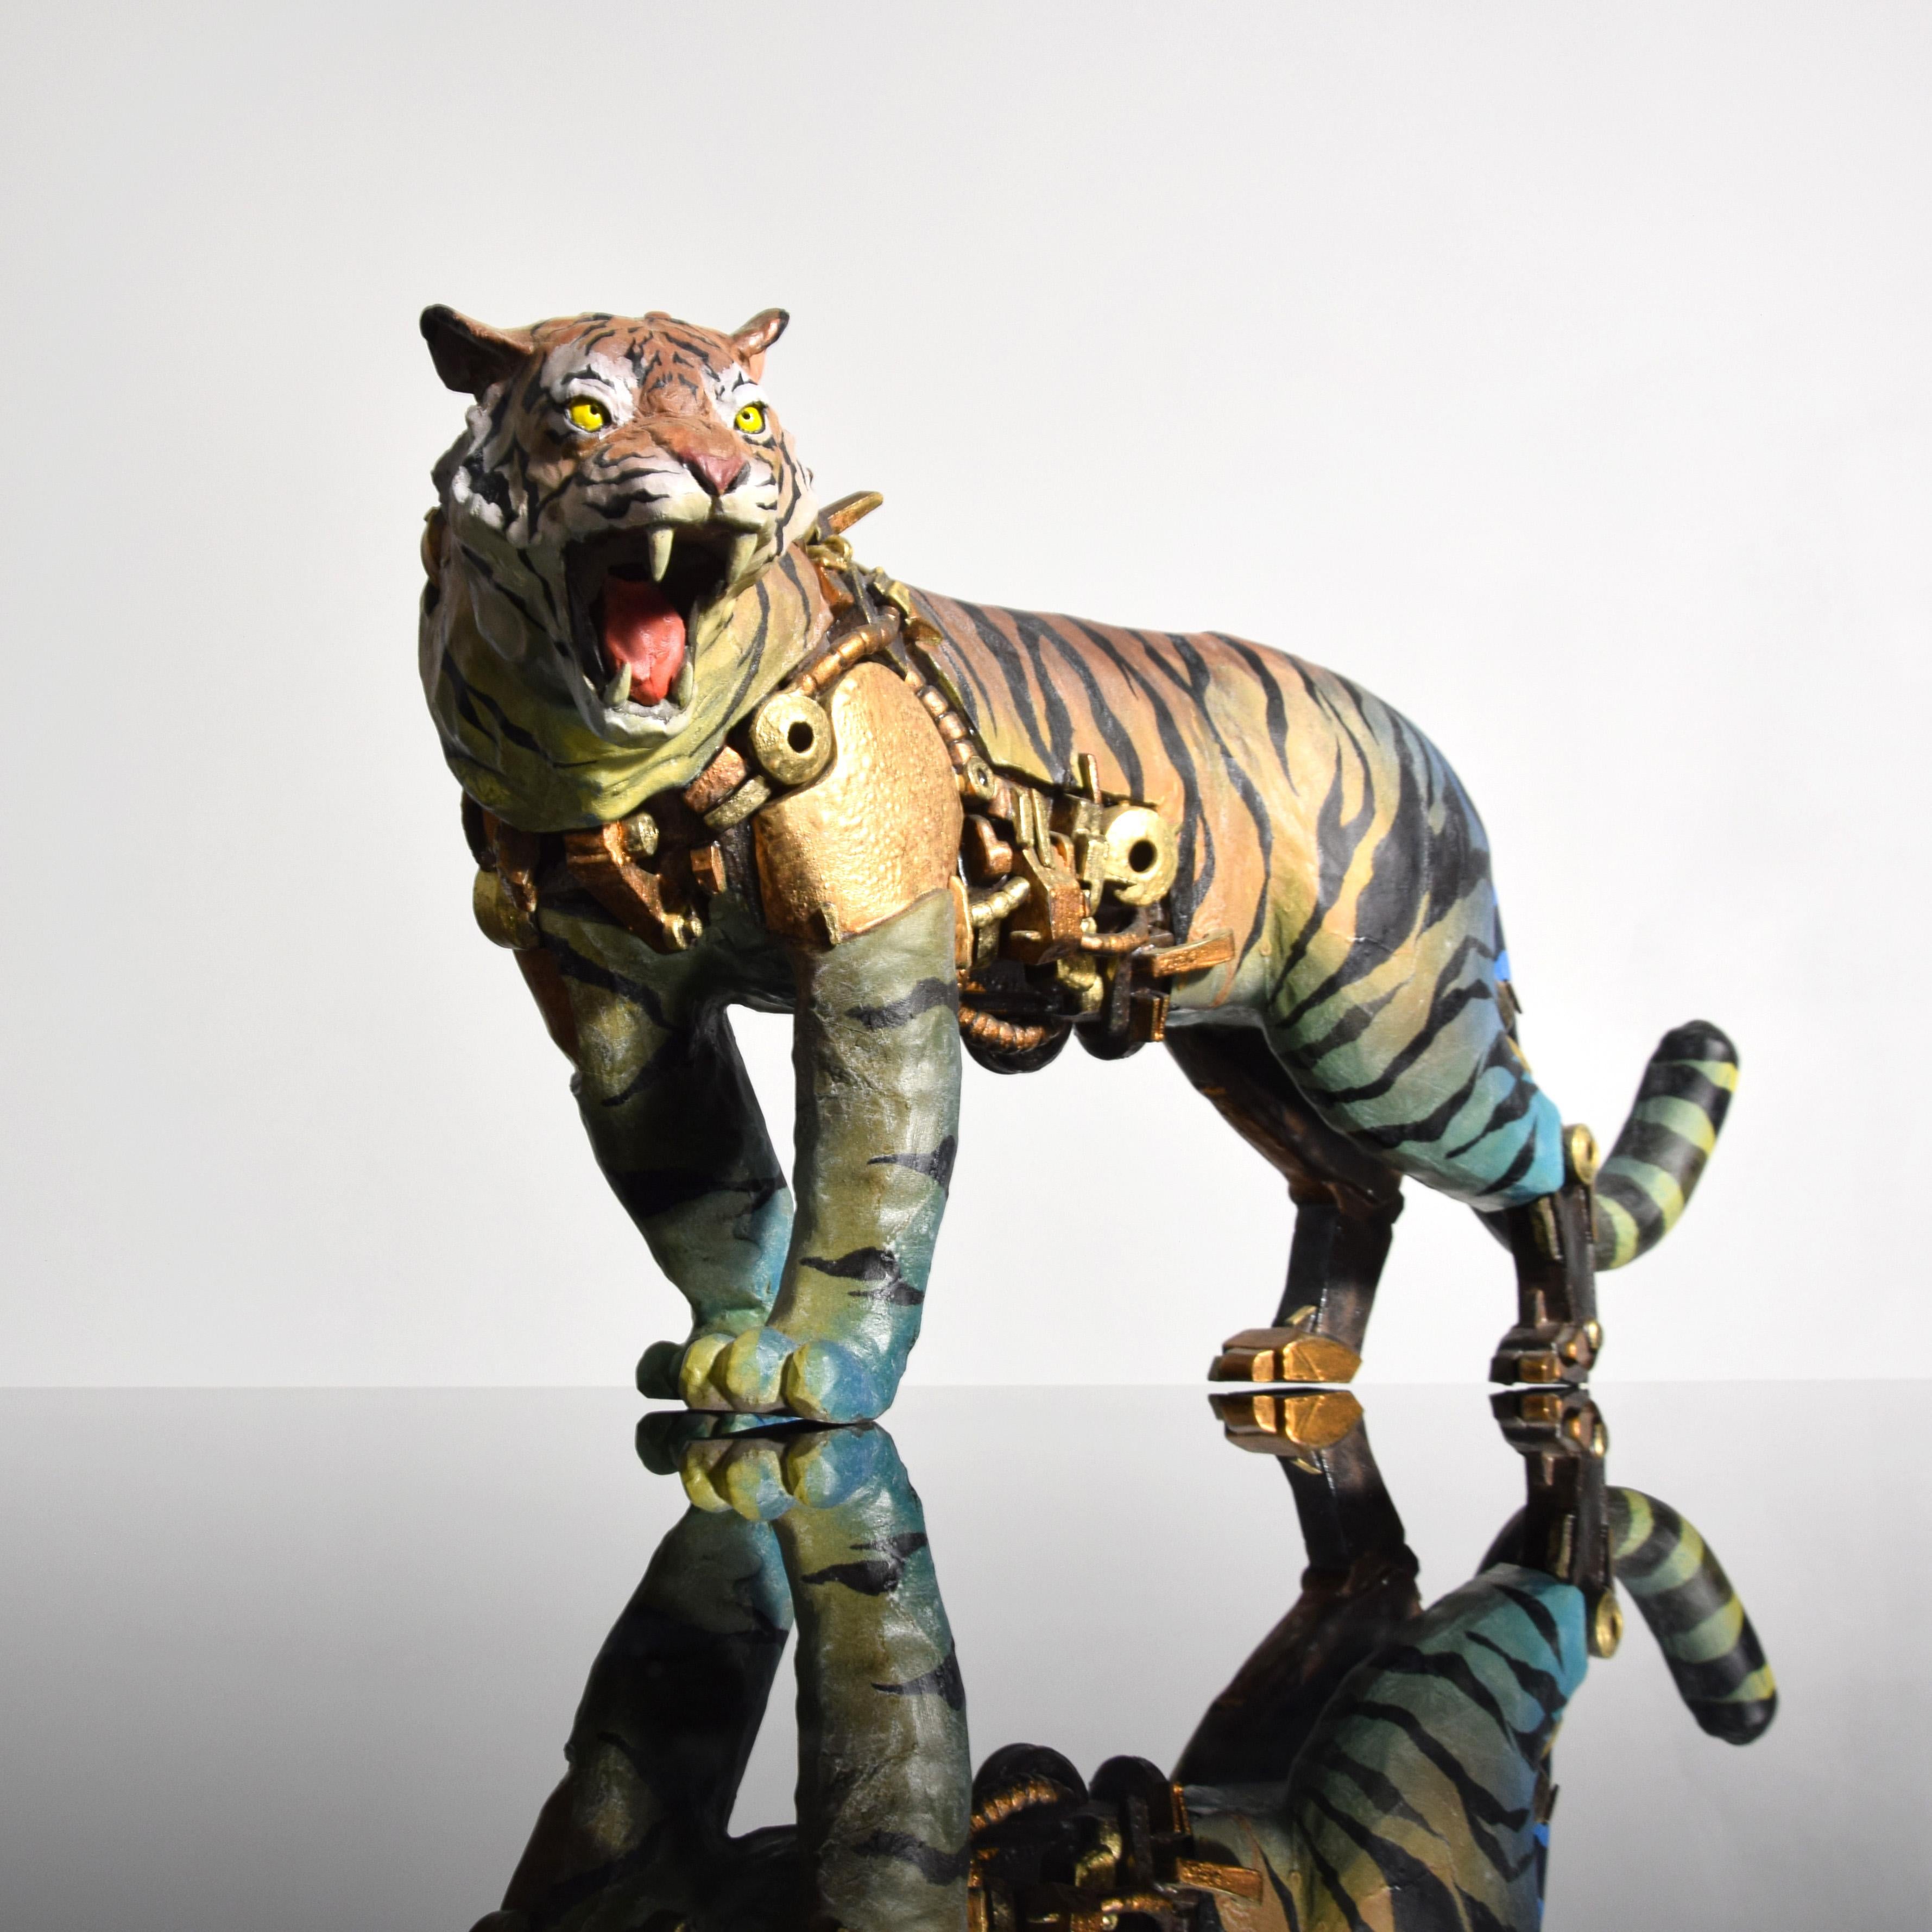 Additional Information: Work is titled “Scientific Name Tiger”. Provenance: Habatat Galleries, Palm Beach, Florida | Private Collection, West Palm Beach, Florida.

Marking(s); notes: no marking(s) apparent

Country of origin; materials: unknown;